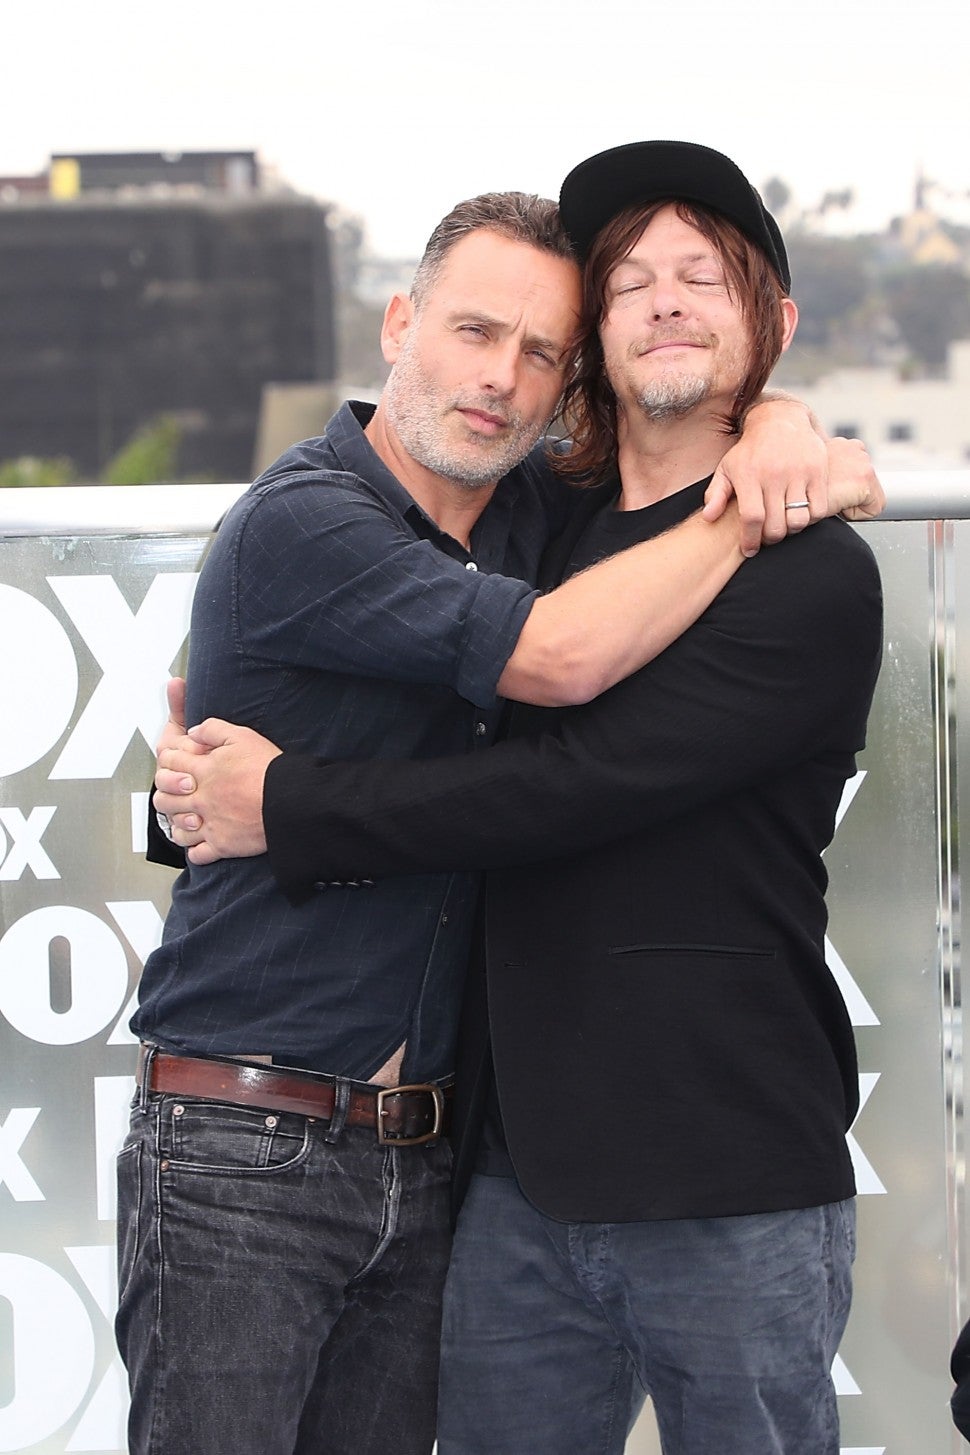 andrew_lincoln_norman_reedus_gettyimages-1002823342.jpg